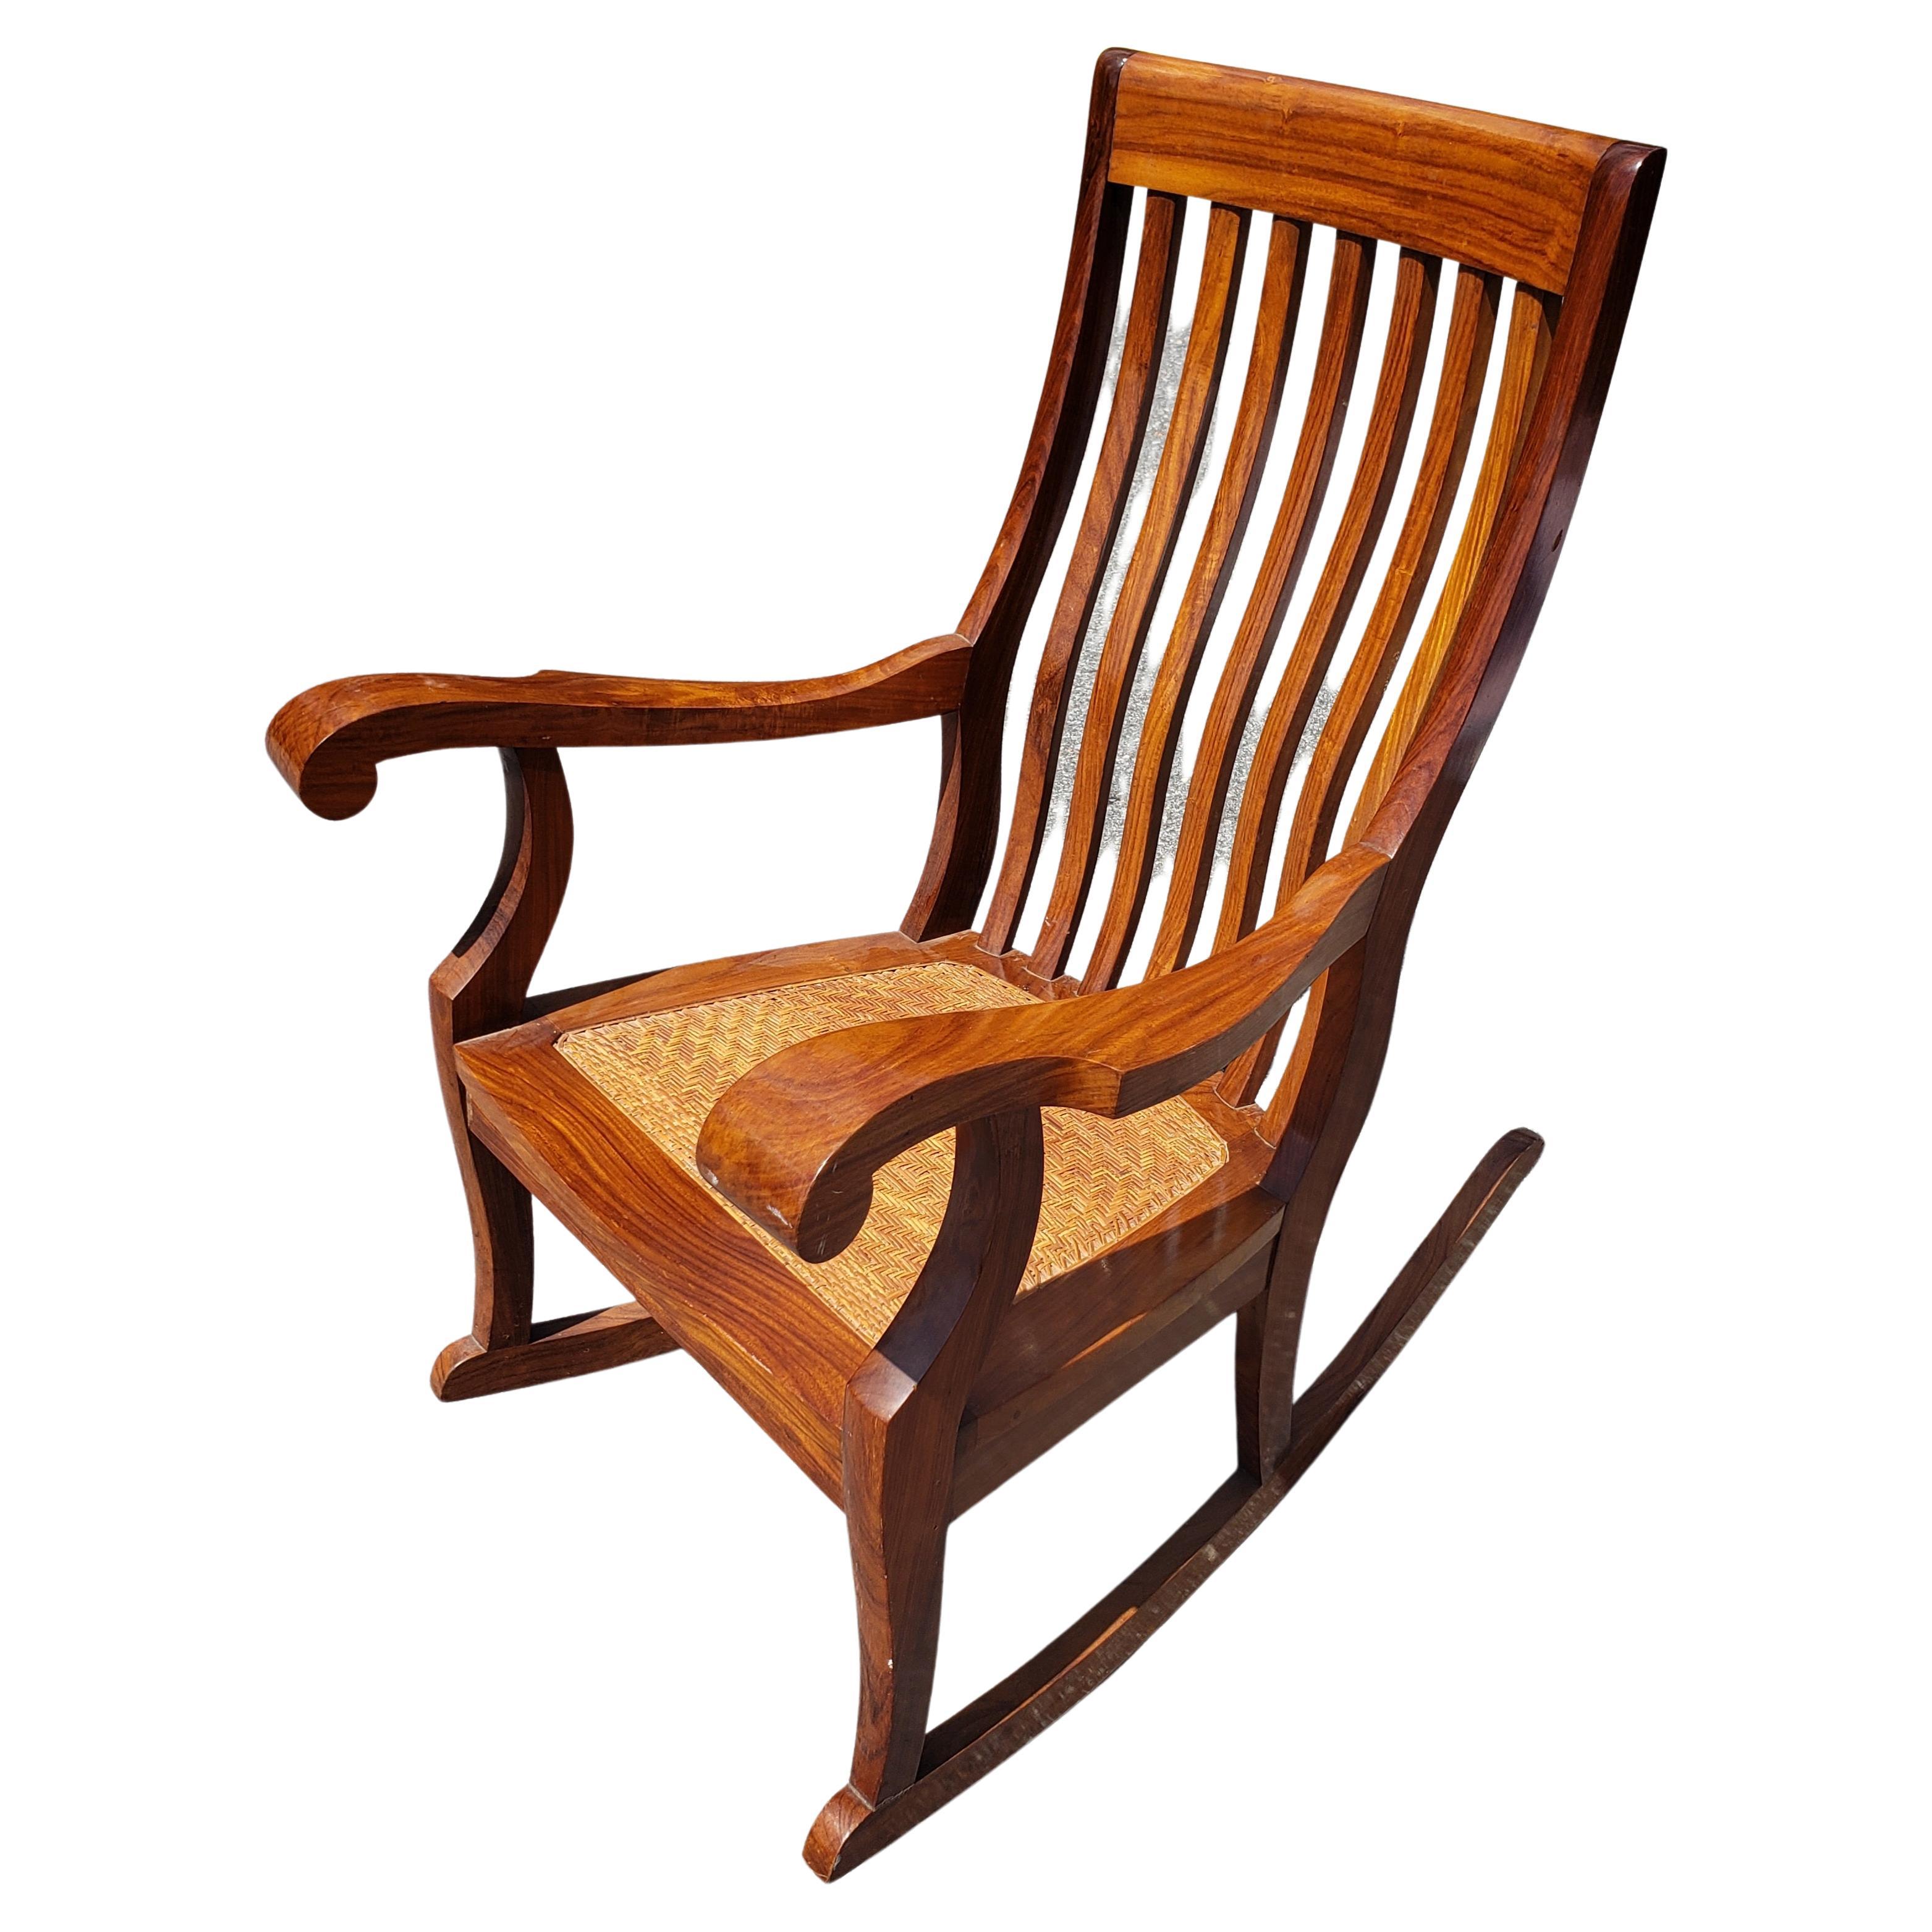 M. Hayat & Brothers Anglo-Indian Hardwood Woven Wicker Seat Rocking Chair